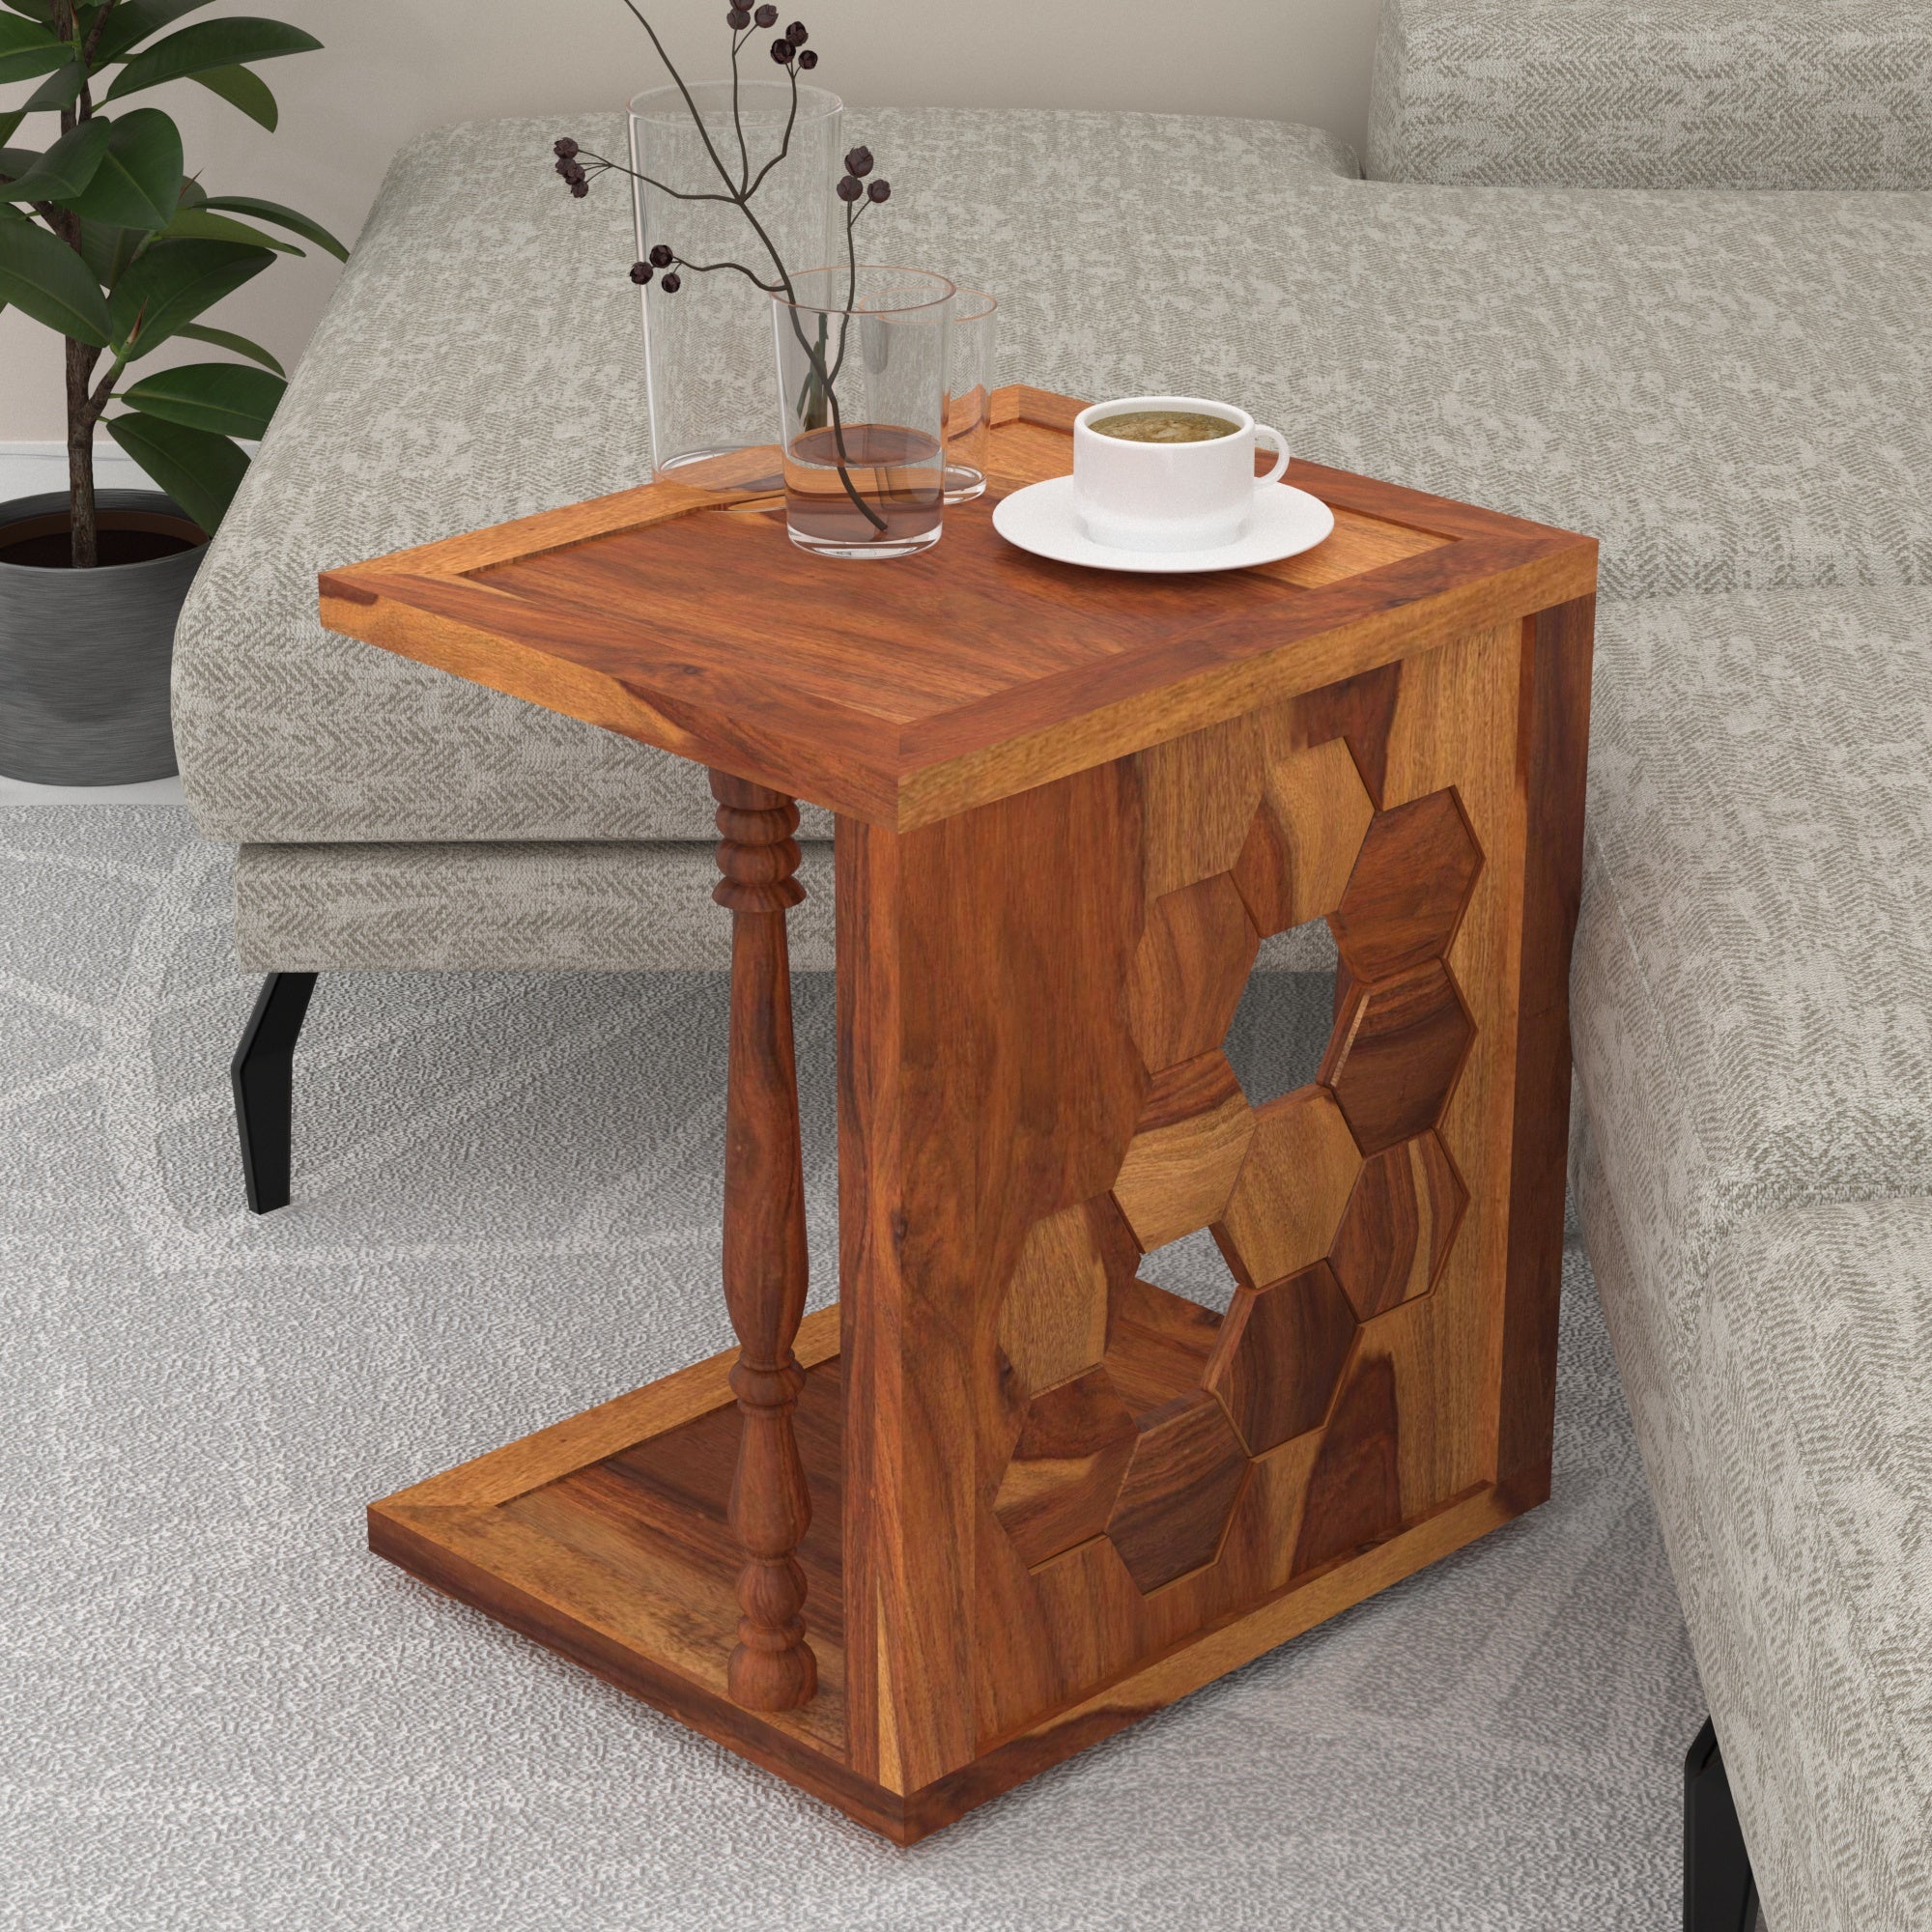 Heritage Quill Blog Designed Wooden Handmade C Table C Table